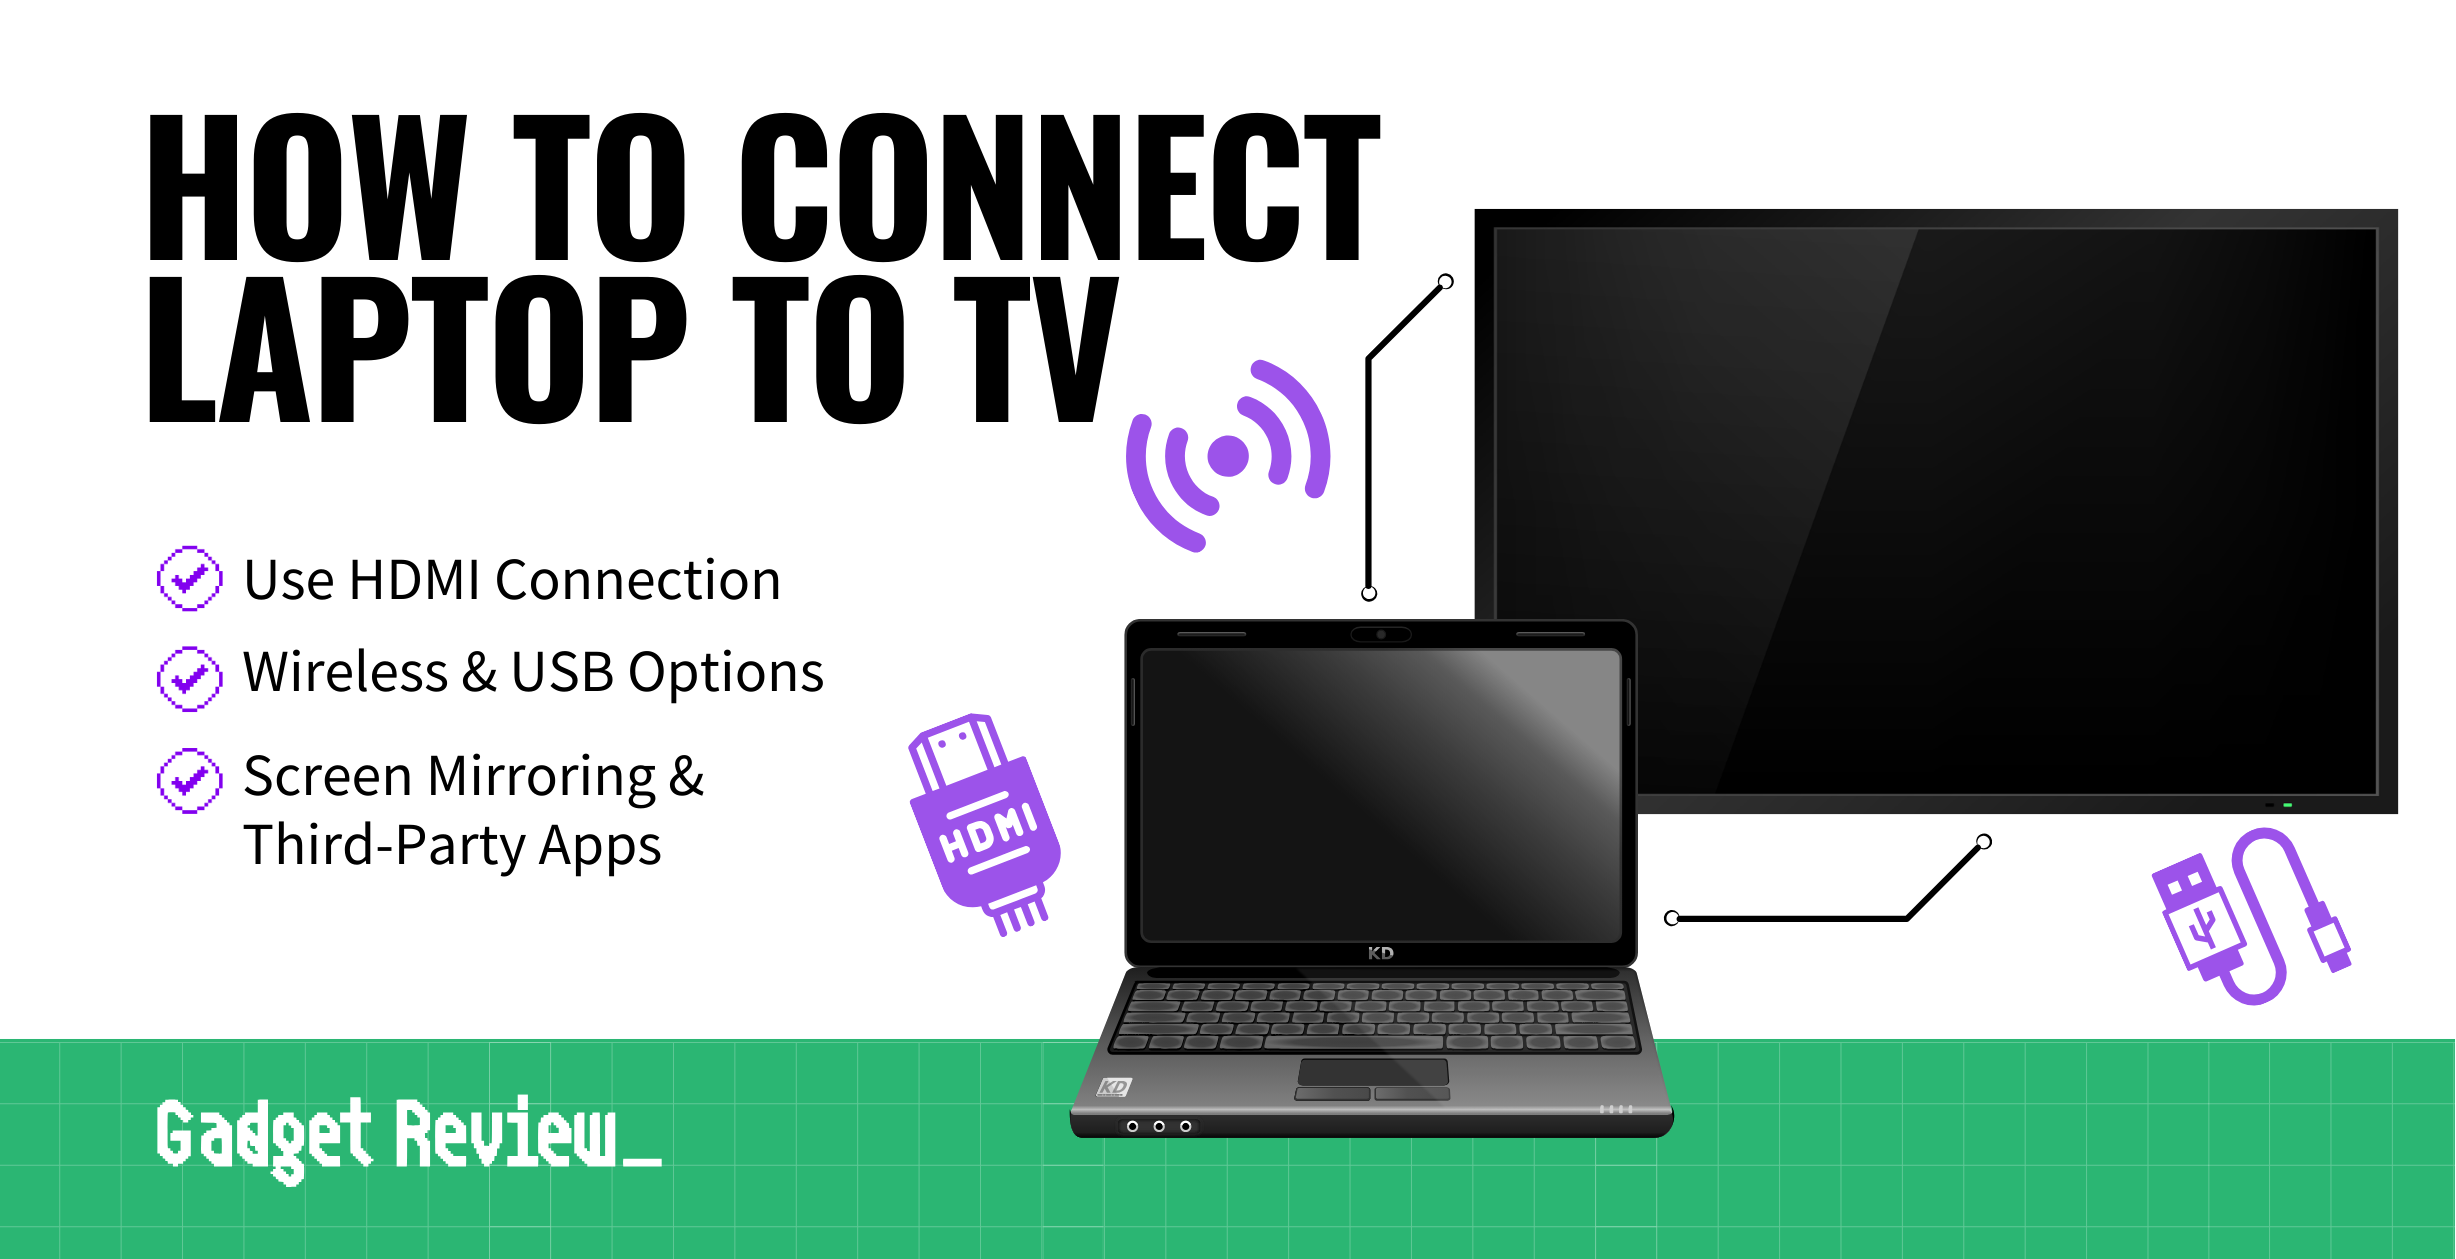 How To Connect A Laptop To Your TV